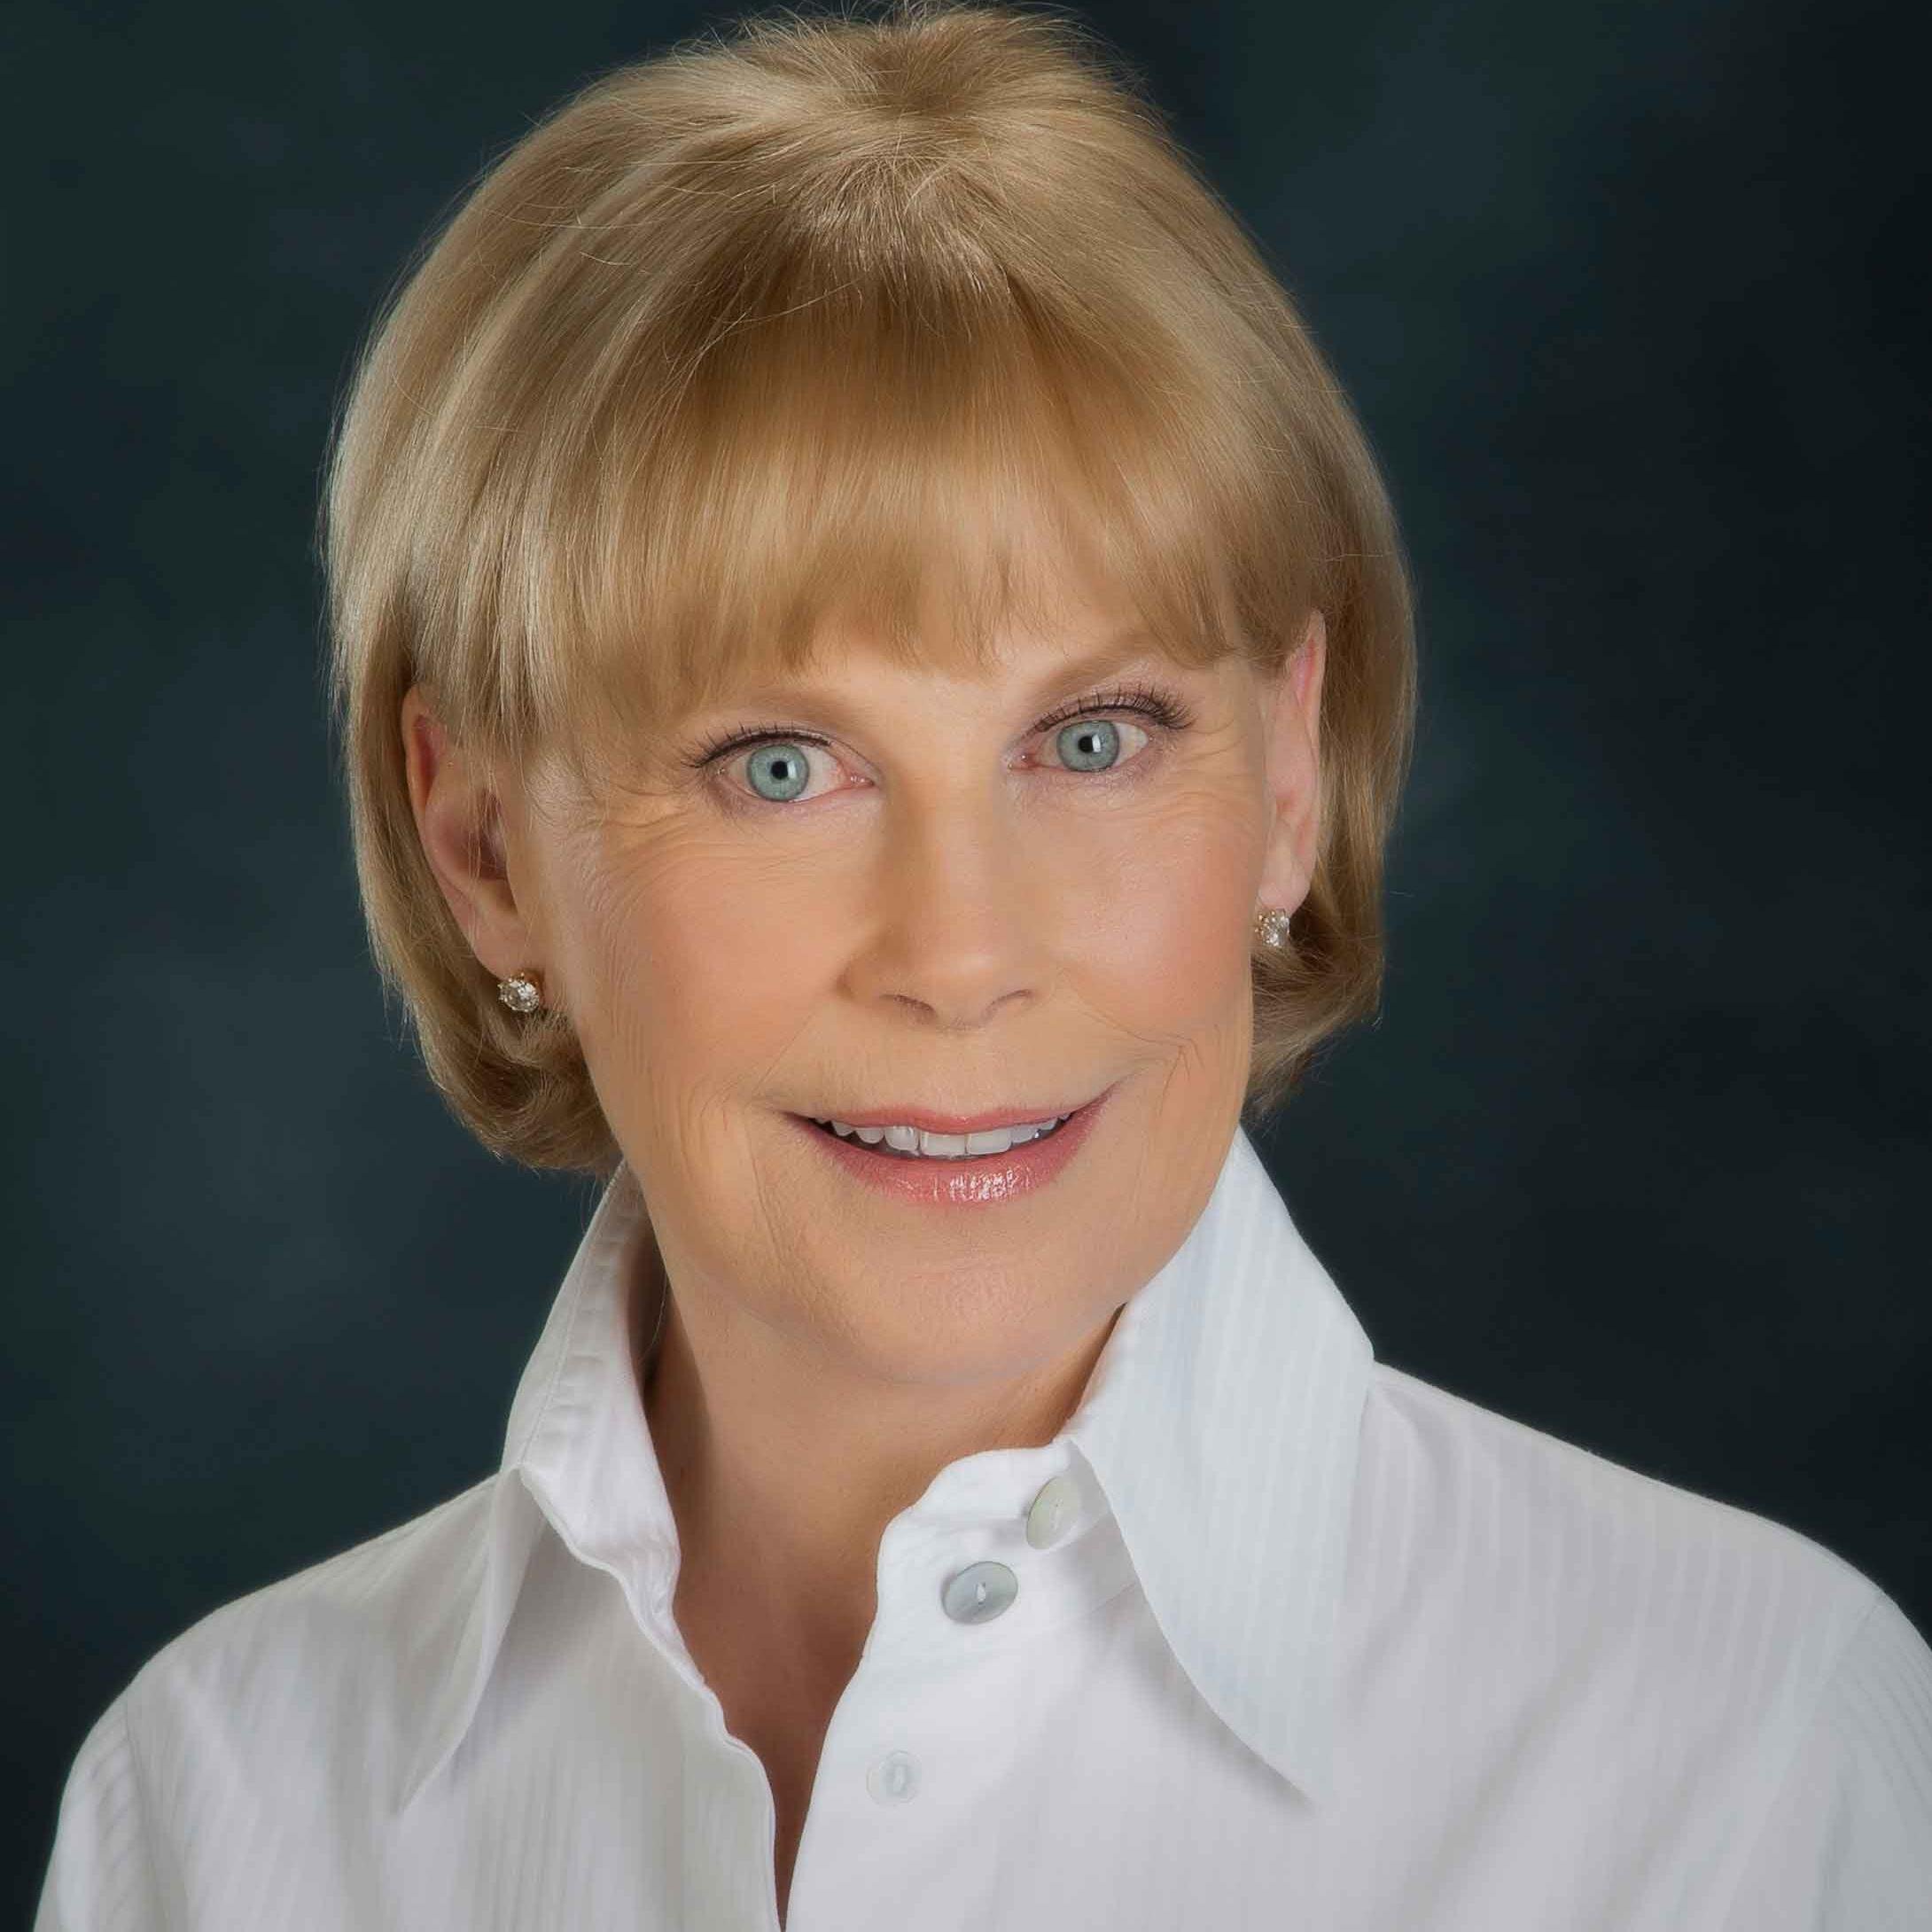 Mary Alice Williams is the anchor for NJTV News, NJTV's weeknightly news program.